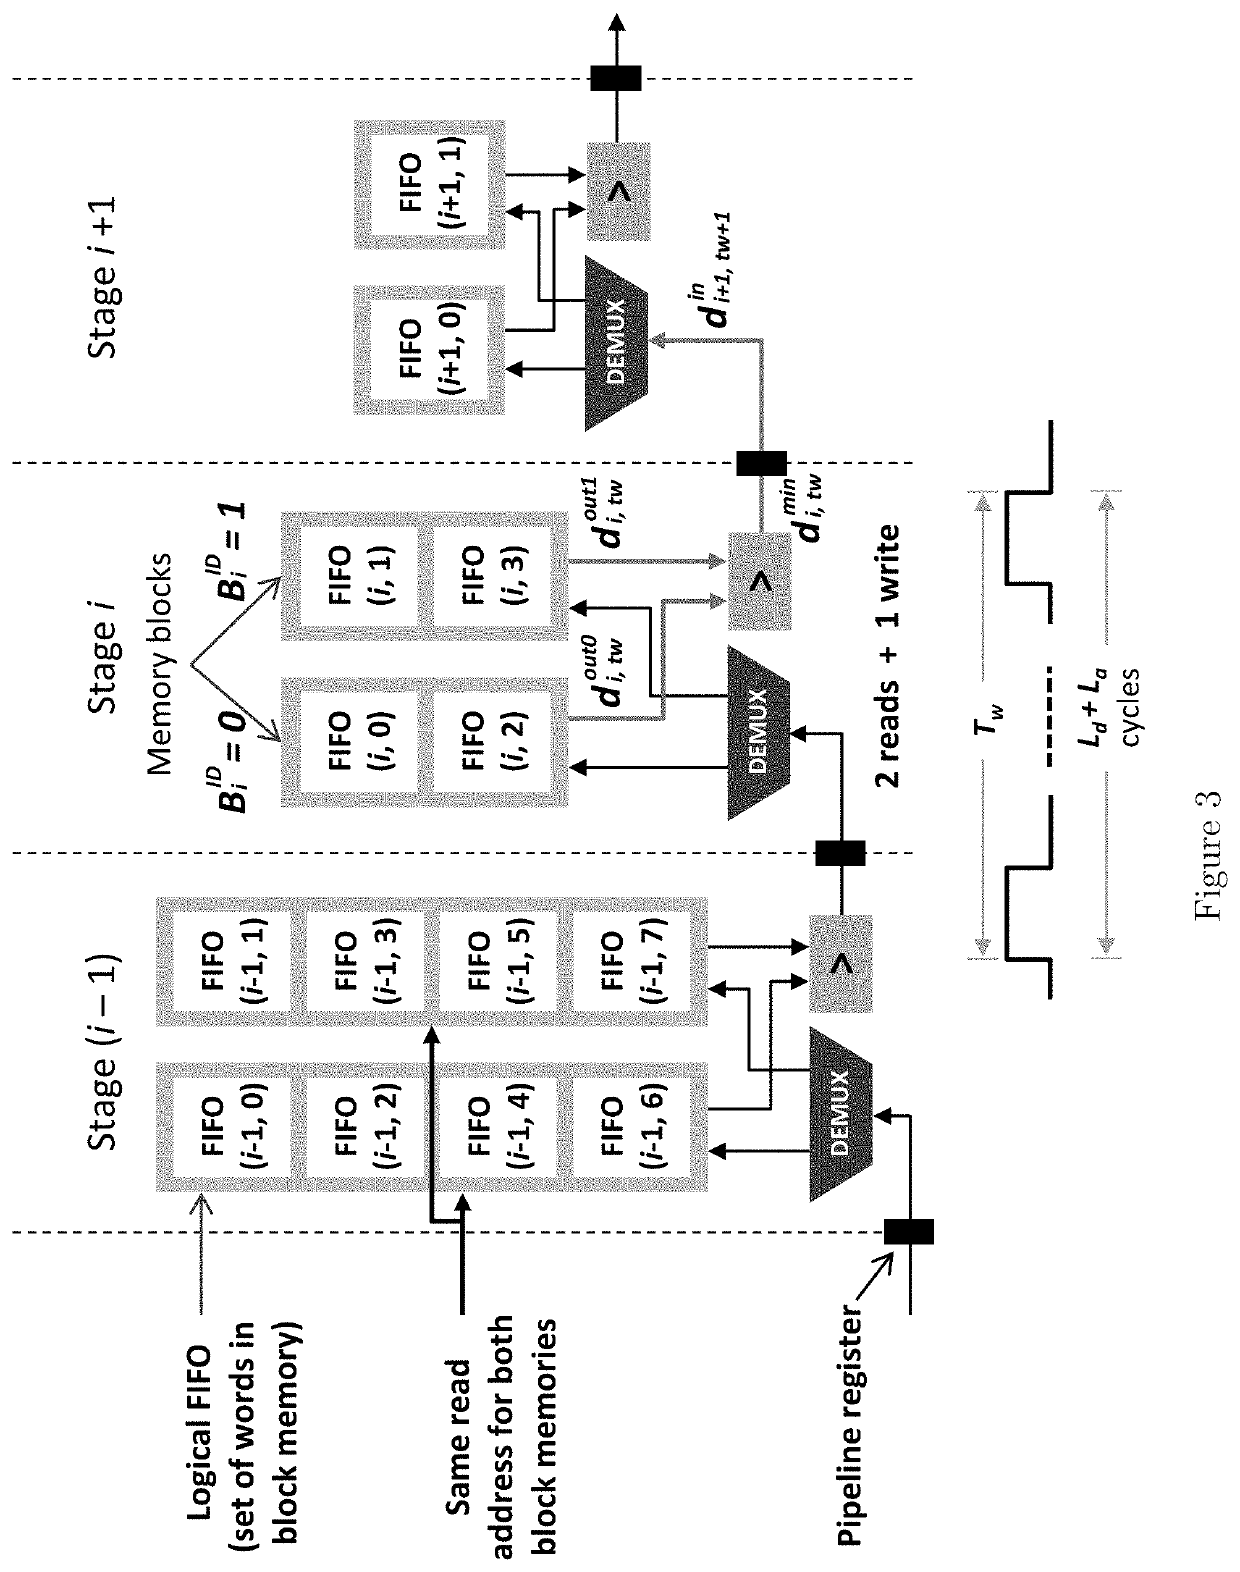 High performance merge sort with scalable parallelization and full-throughput reduction